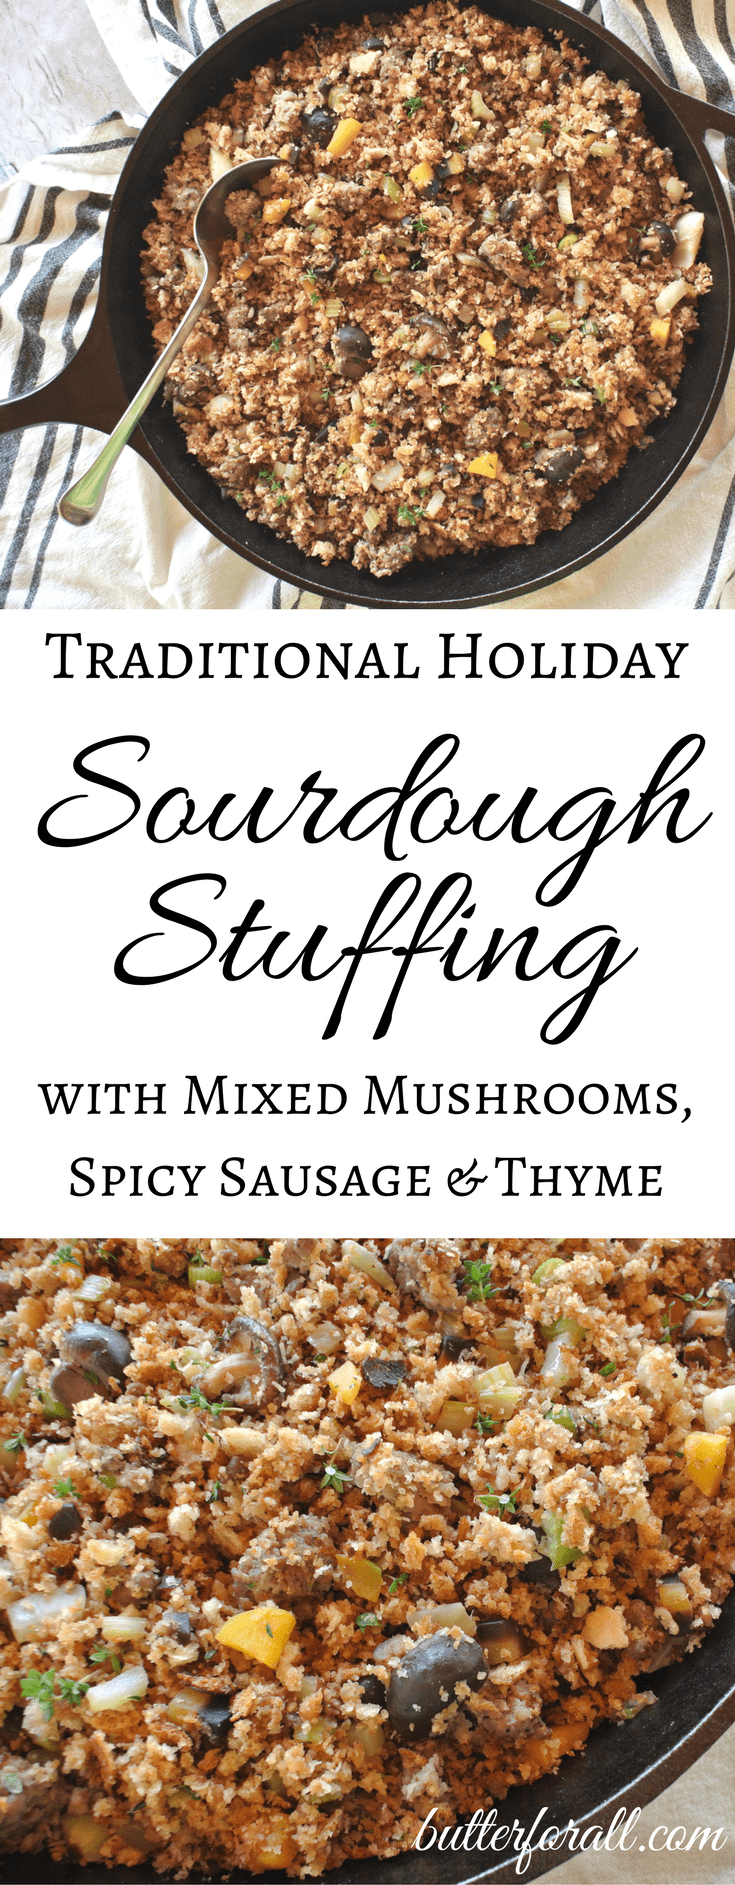 Sourdough Stuffing With Mixed Mushrooms, Spicy Sausage, and Thyme ...